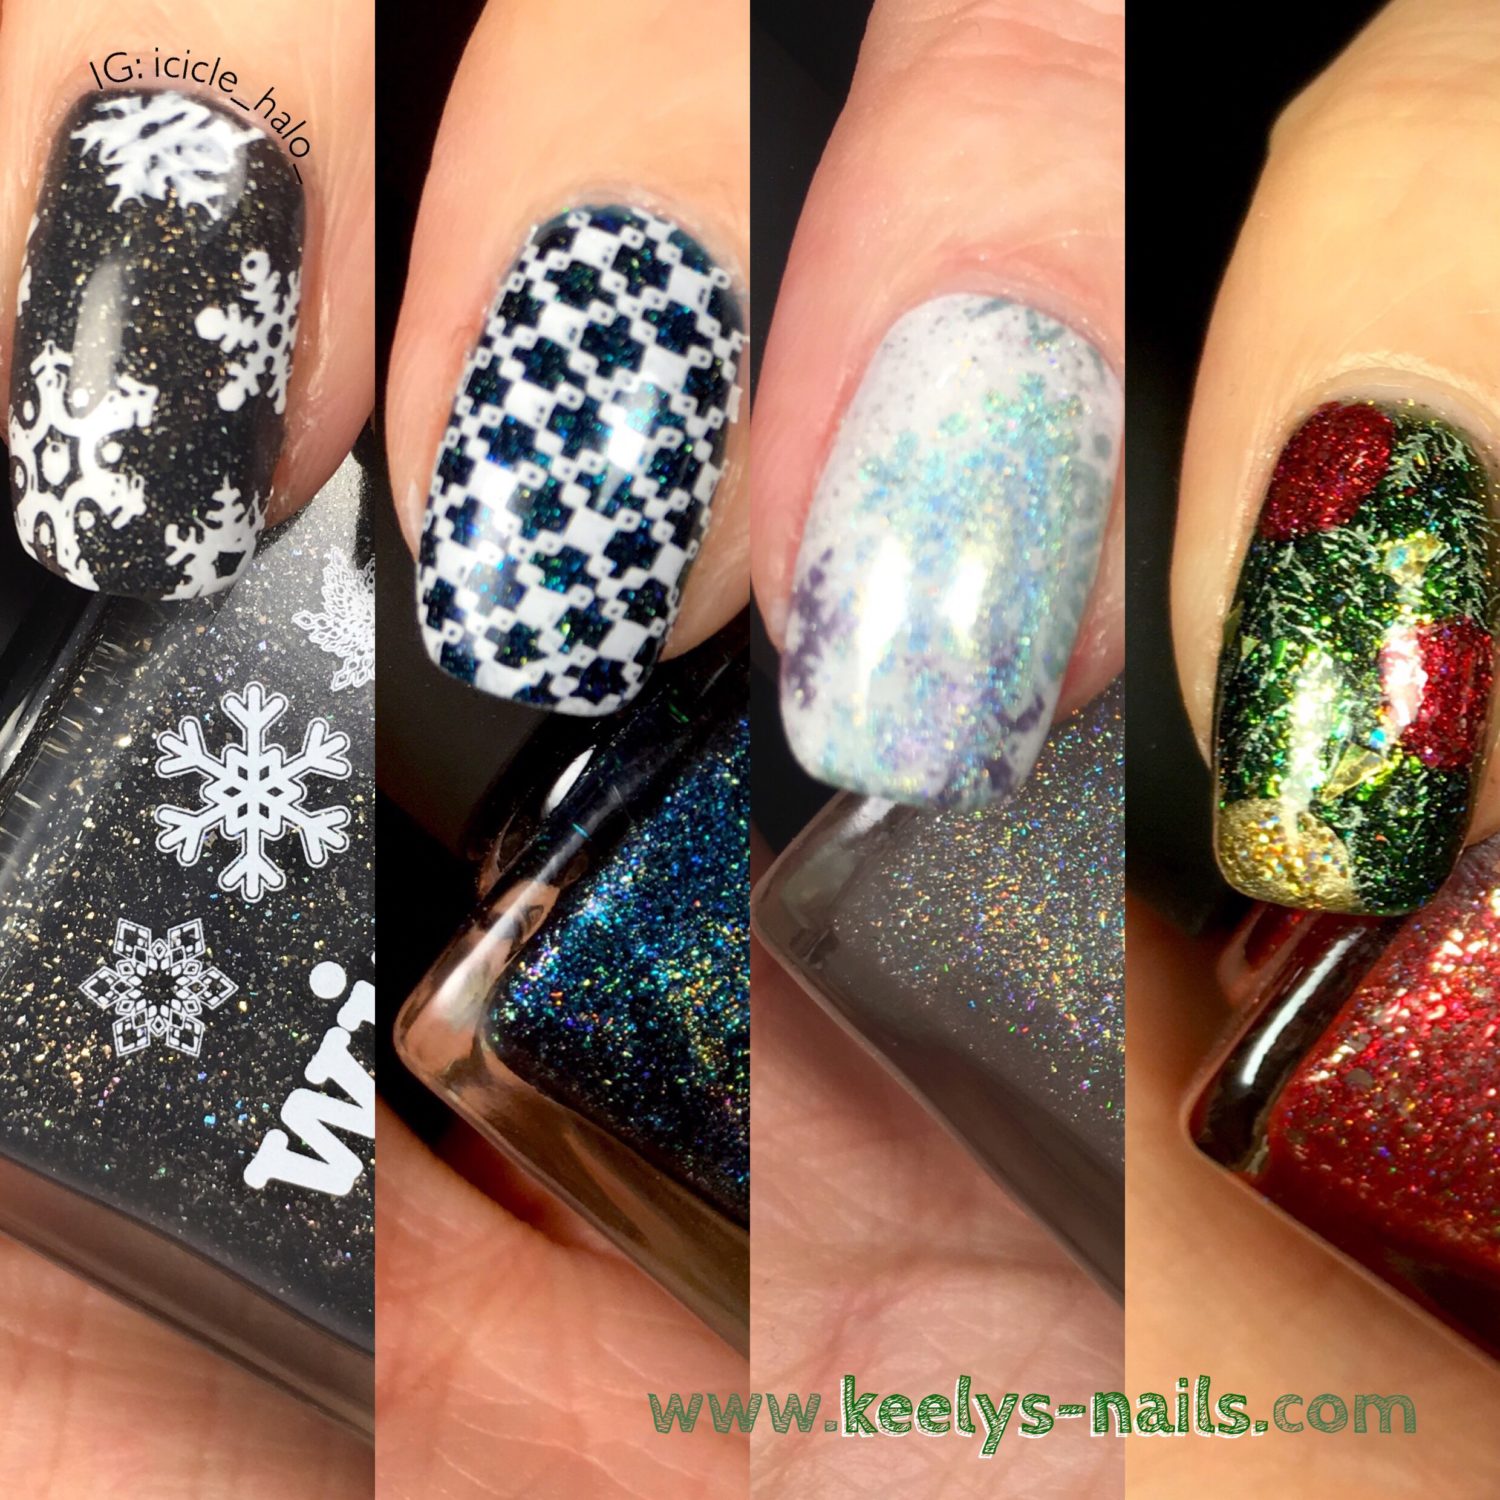 Ten Christmas nail art ideas from Keely's Nails